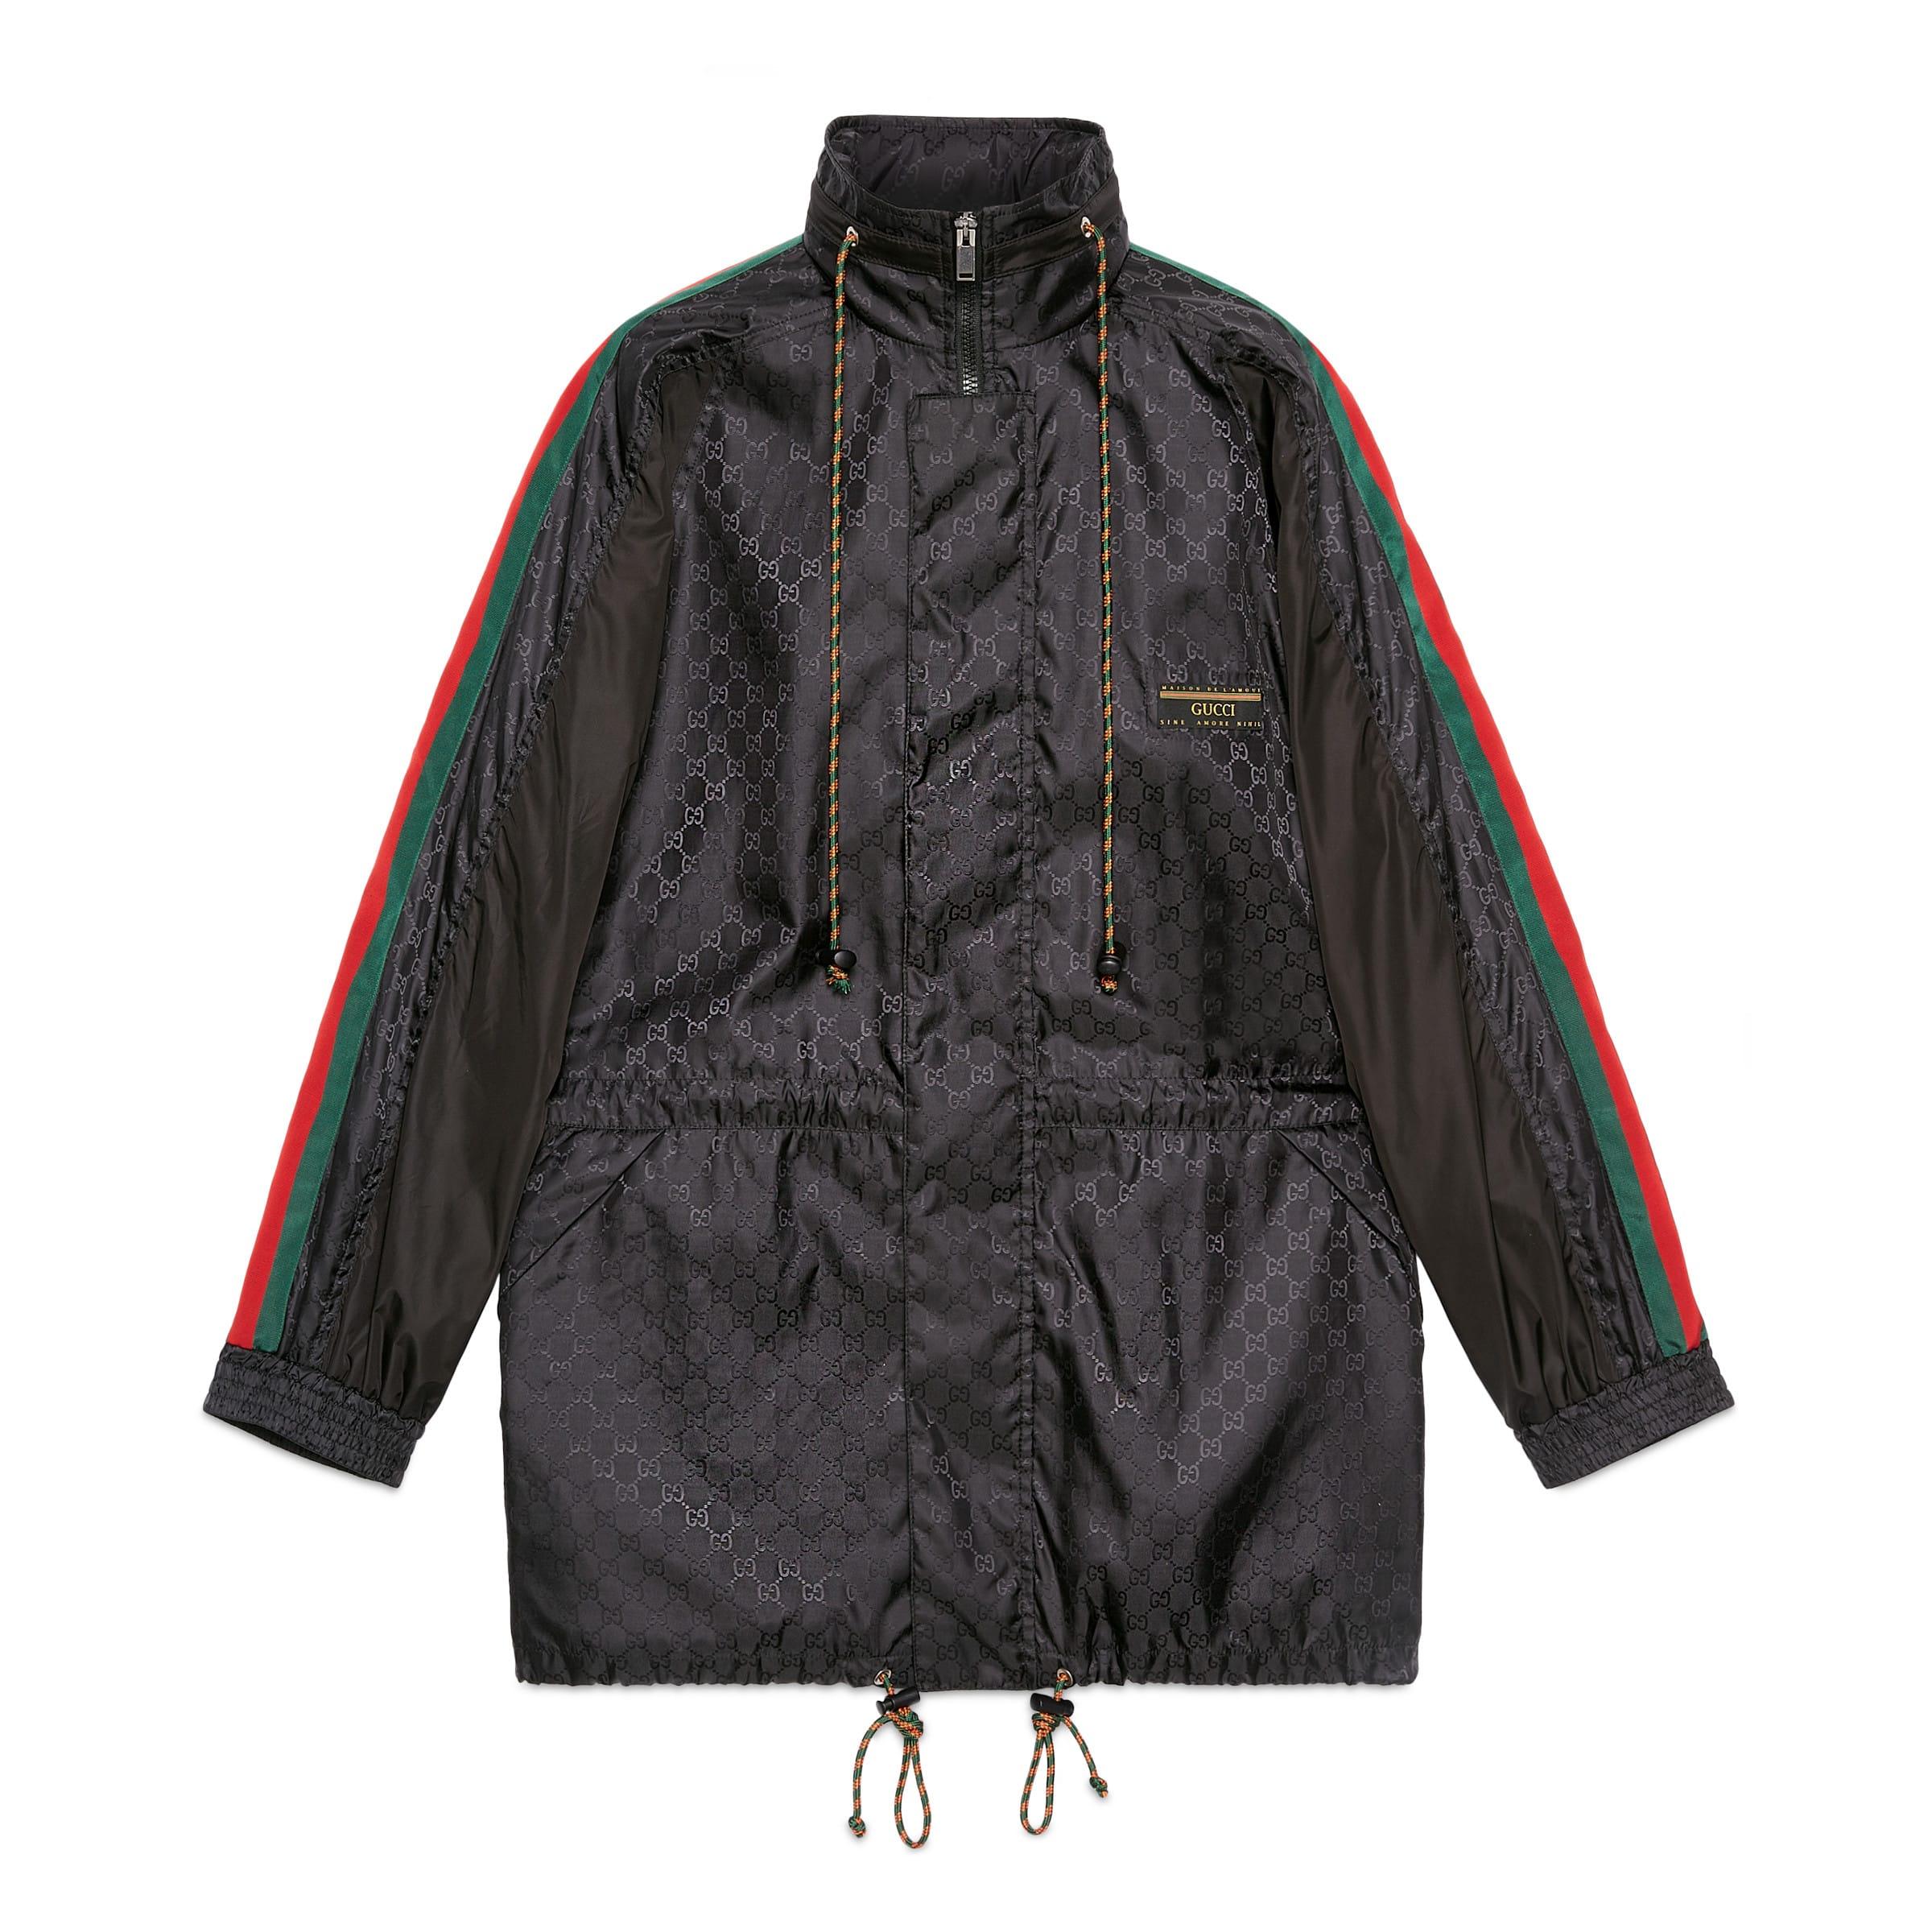 Gucci Synthetic gg Jacquard Nylon Jacket in Black for Men - Save 40% - Lyst